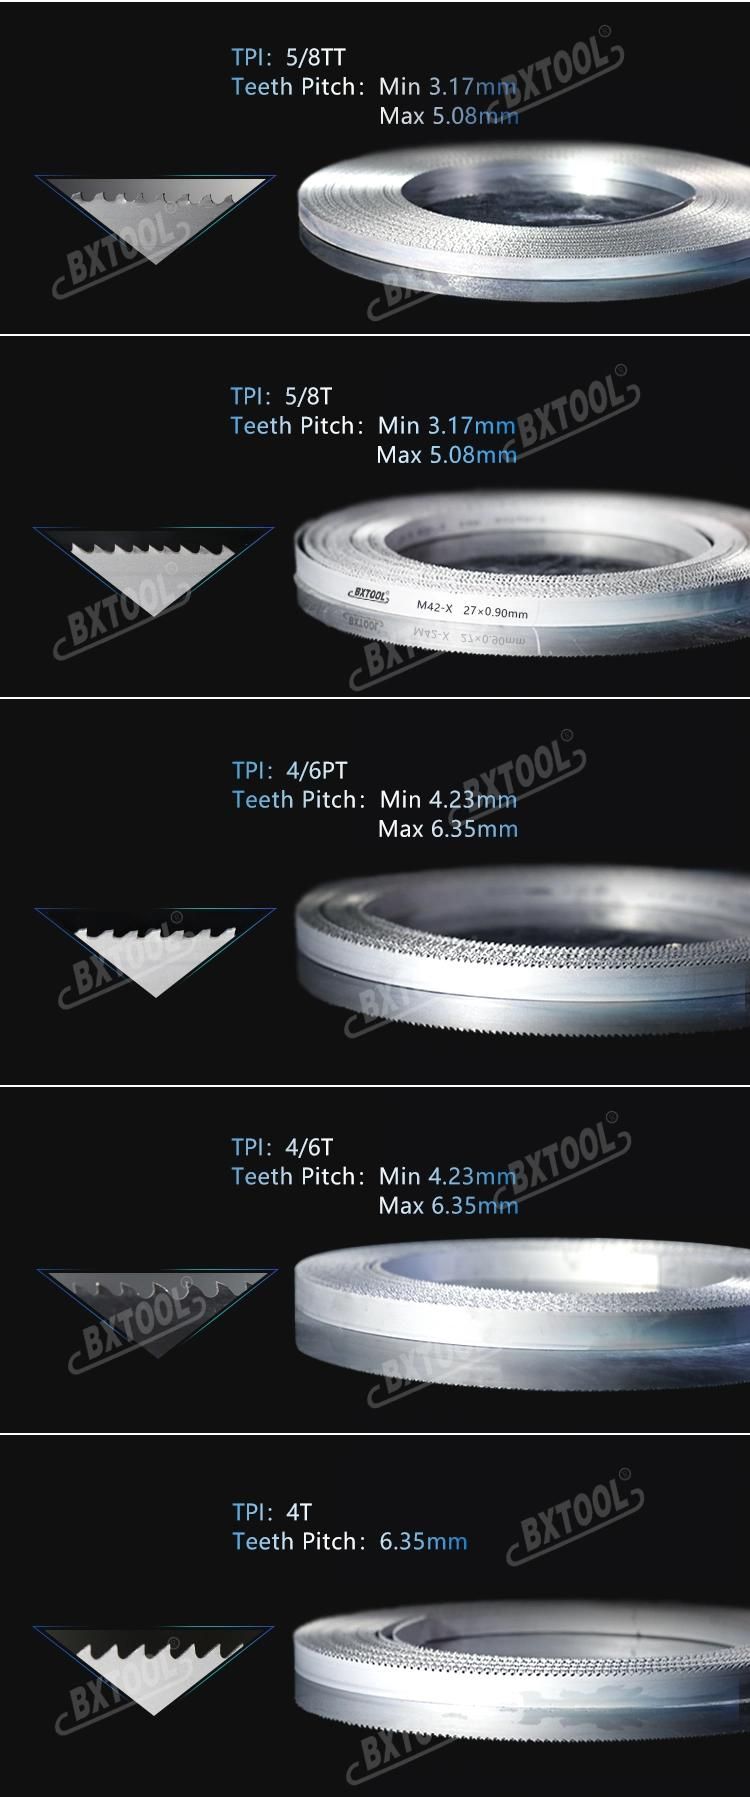 Bxtool HSS M42 German Saw Bimetal Band Saw Blade Thick 0.6mm to 1.6mm for Steel and Hard Wood Cutting